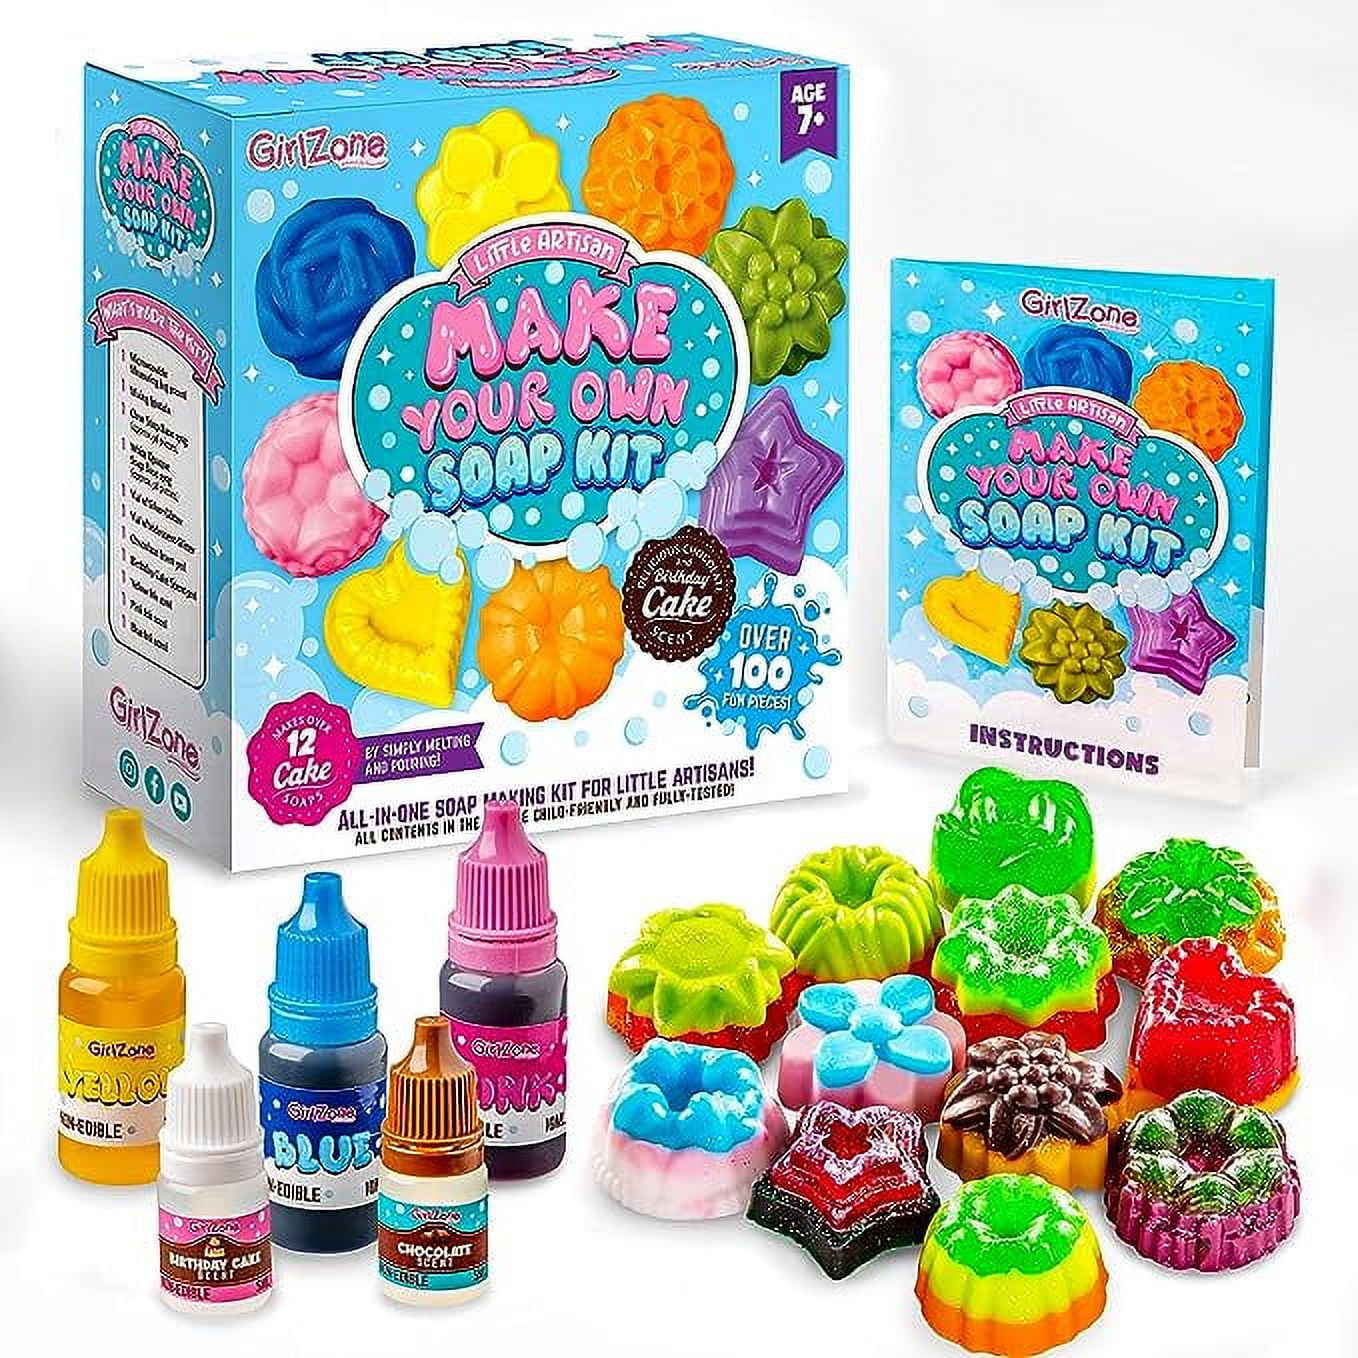 Girlzone Little Artisan Make Your Own Soap Kit, Over 100 Awesome Pieces In  One Soap Making Kit To Create 12 Cake Kids Soap With Yummy Scents And Color  